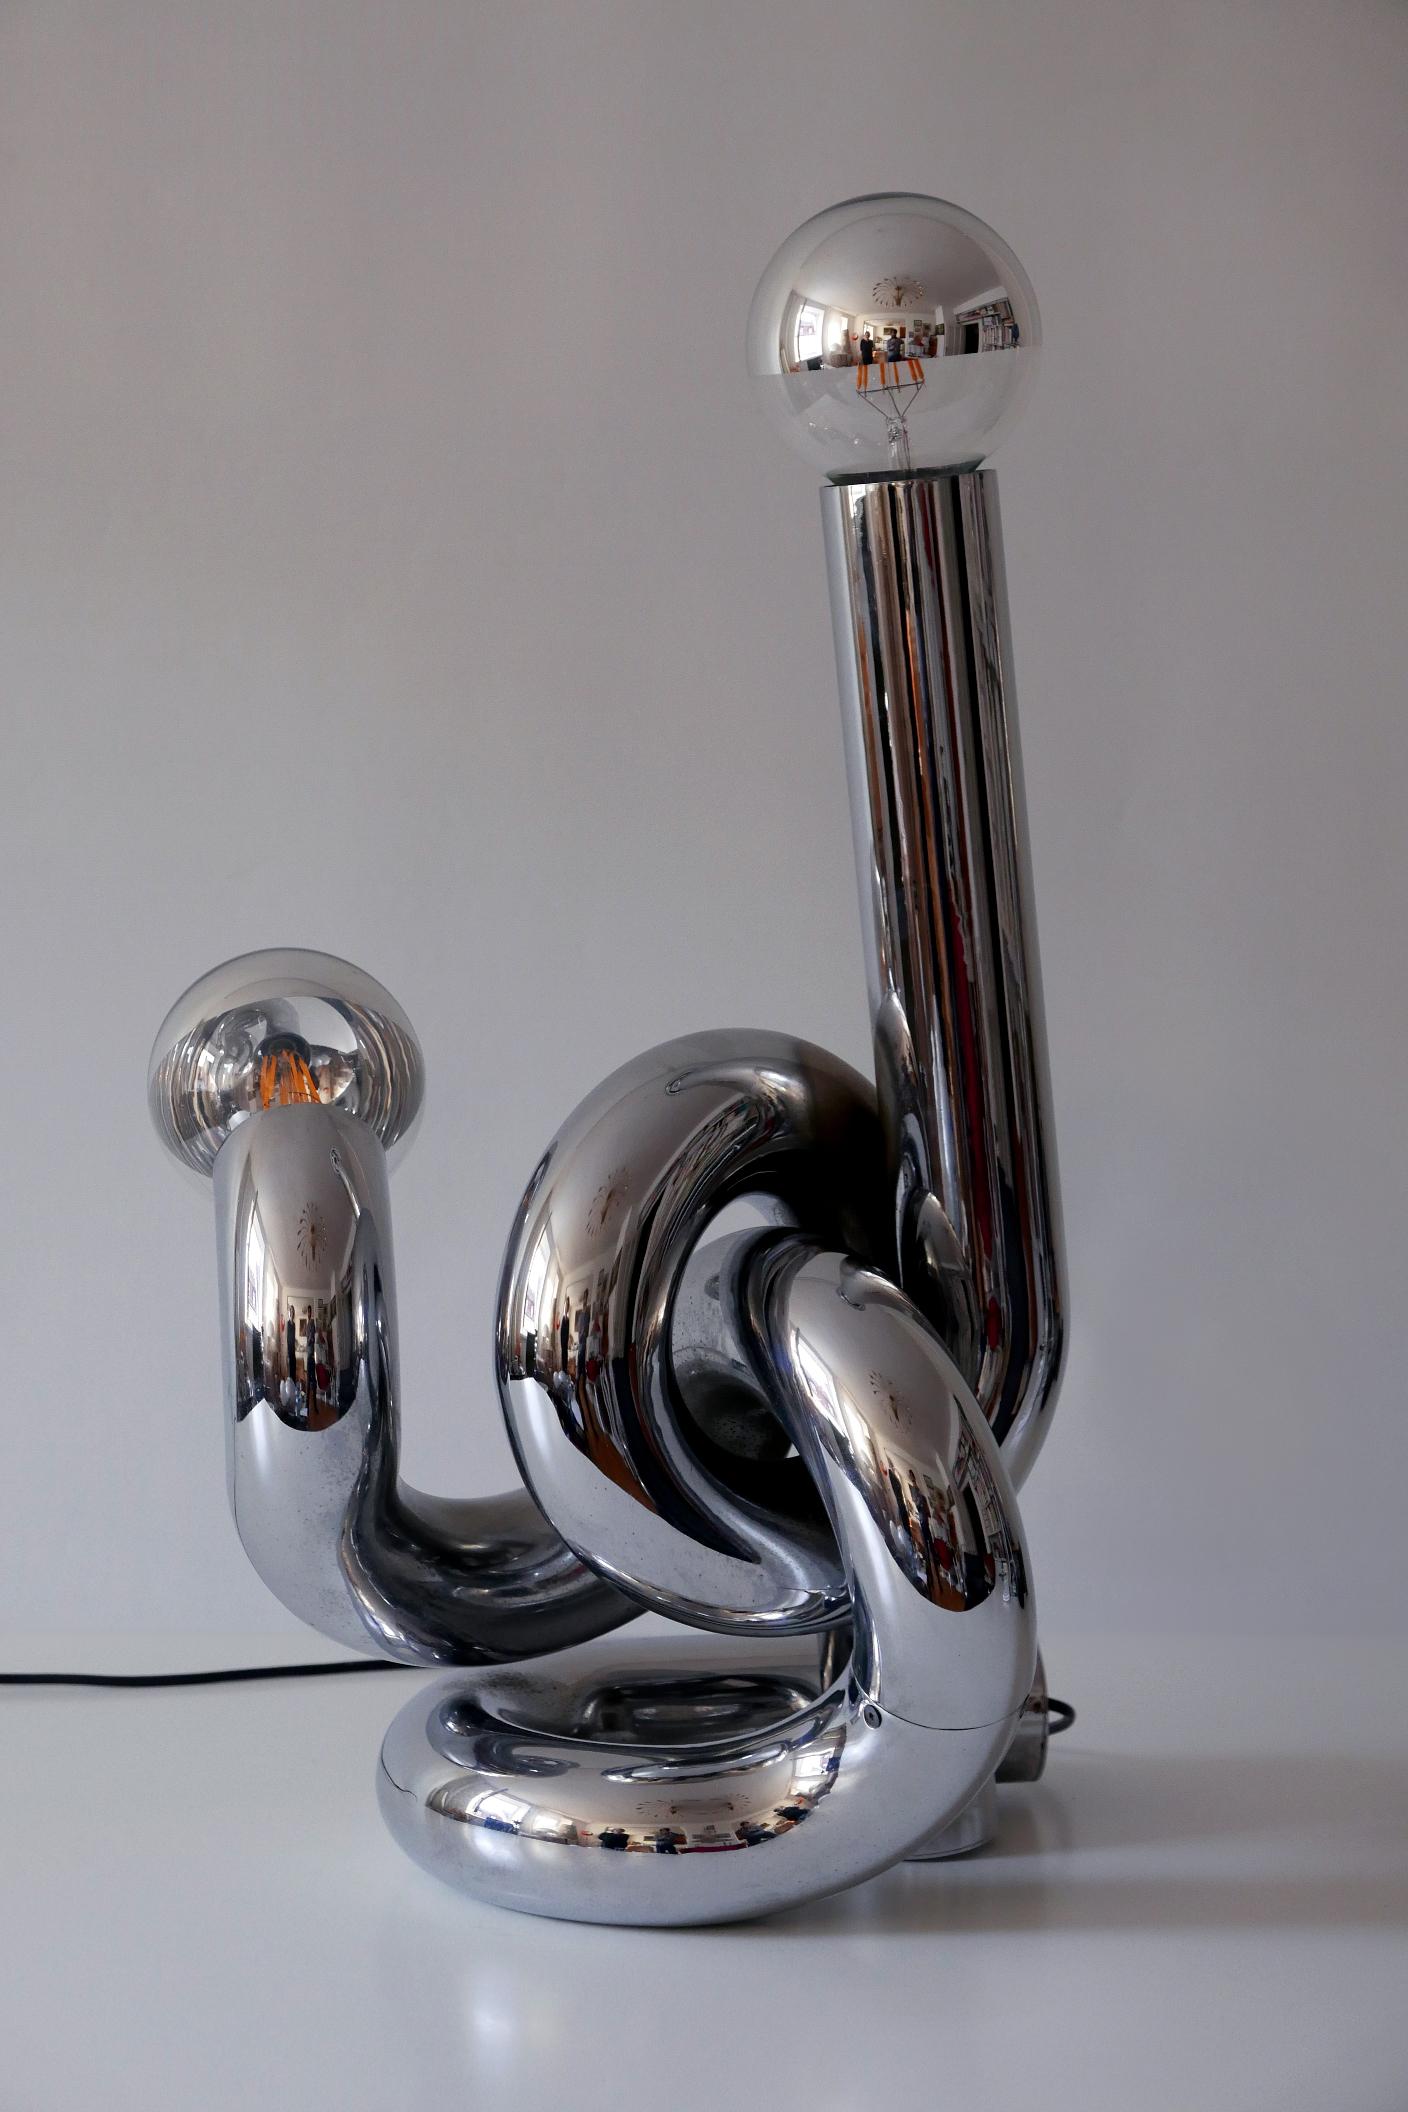 Gorgeous Mid-Century Modern light sculpture / table or floor lamp 'Bruco'. Designed by Giovanni Banci, Firenze, Italy, 1960s.

Executed in massive chrome-plated steel, the lamp comes with 2 x E27 / E26 Edison screw fit bulb sockets, is wired, in